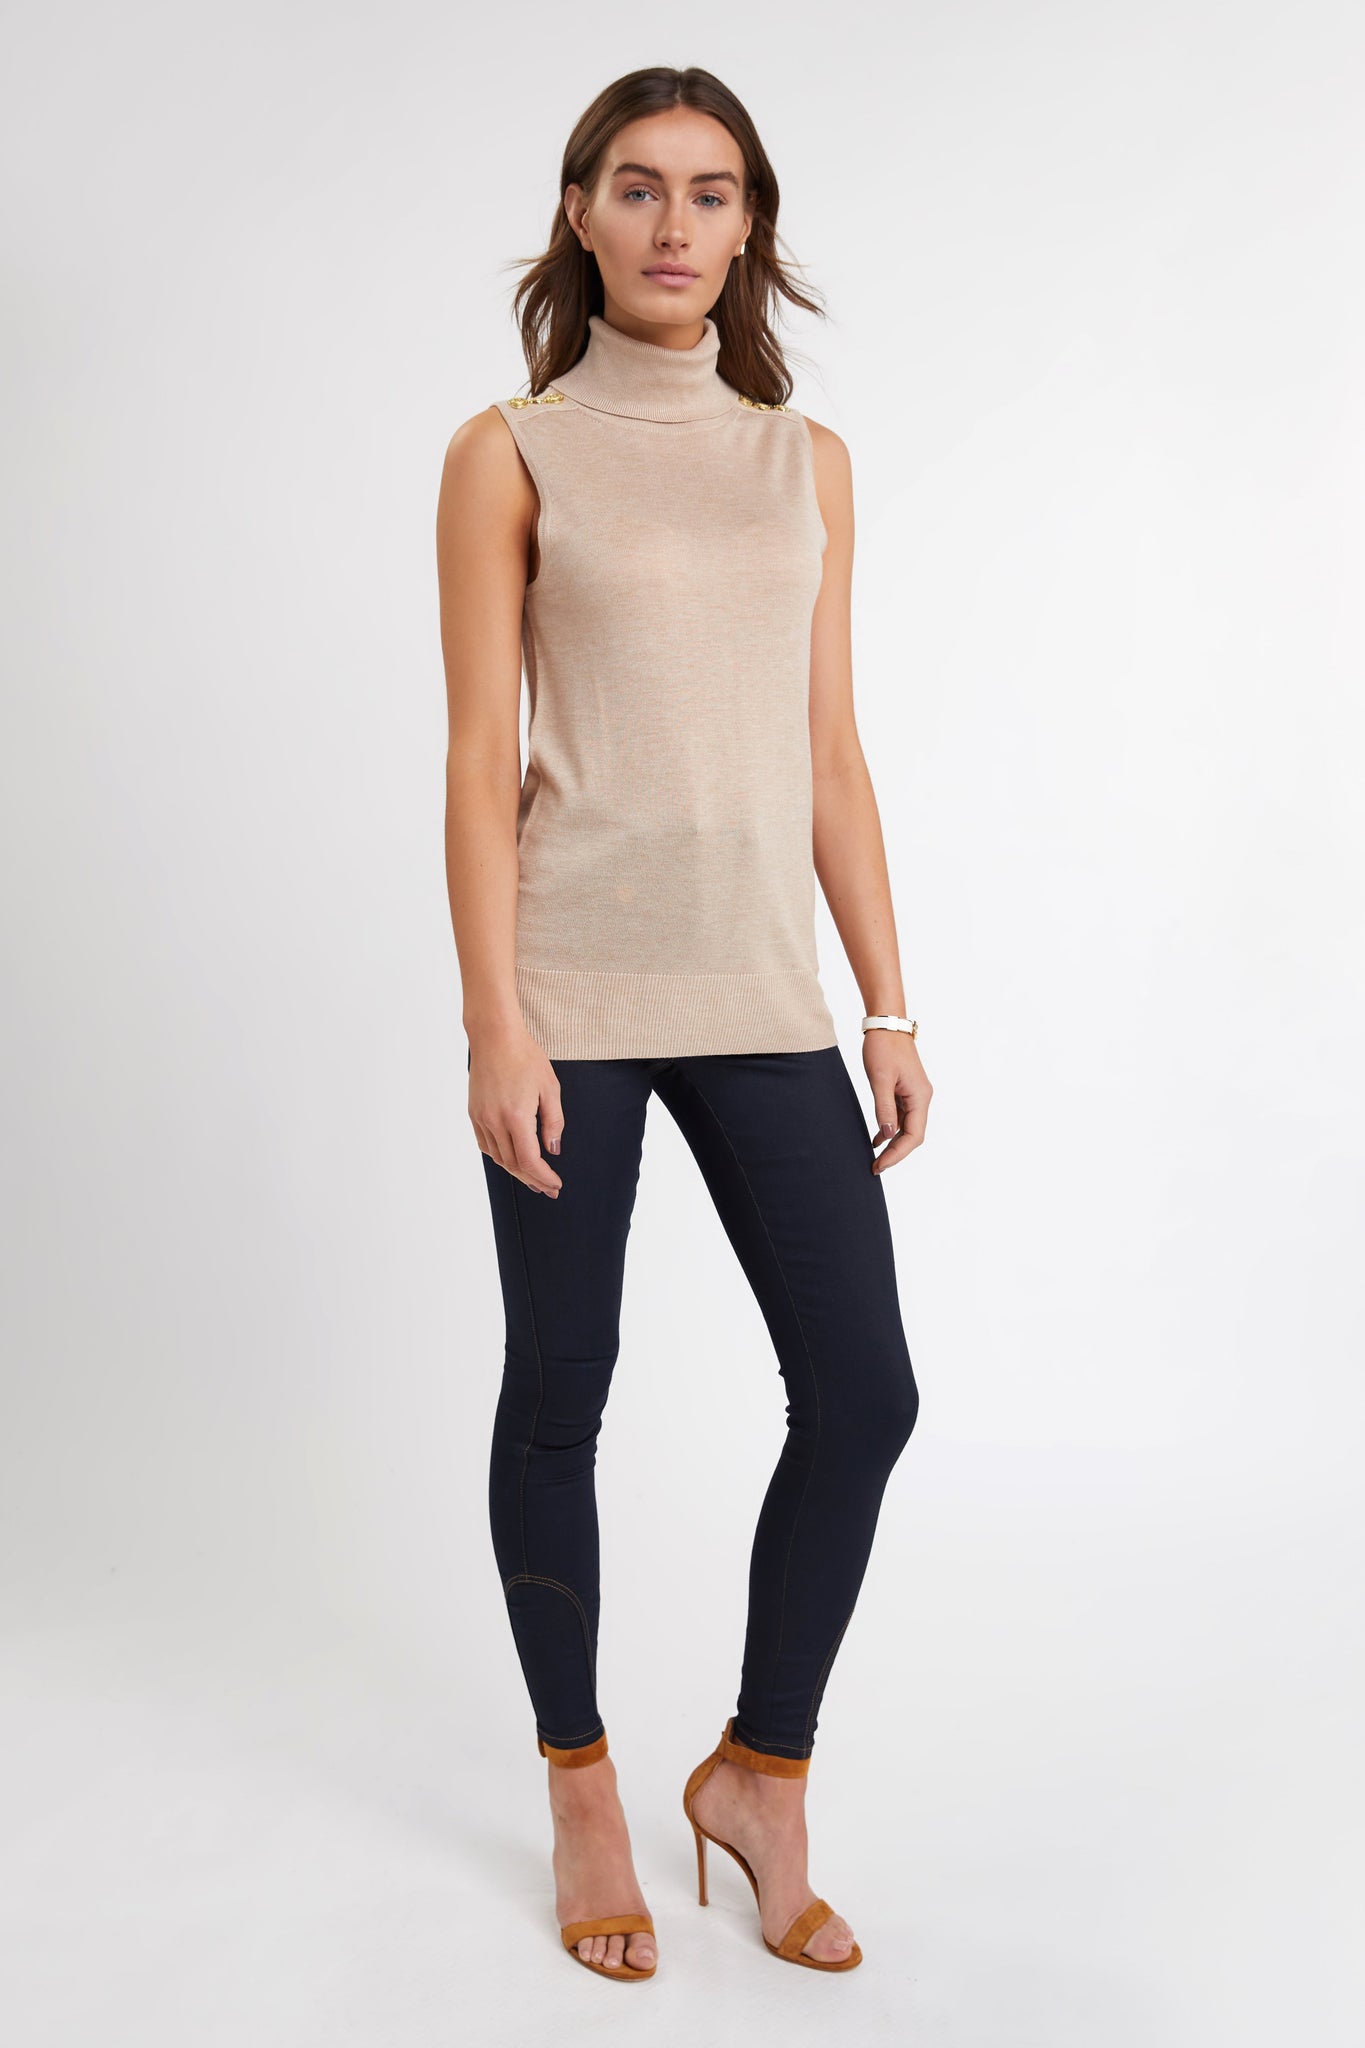 fitted lightweight sleeveless rollneck knit in camel with gold button detail across shoulders